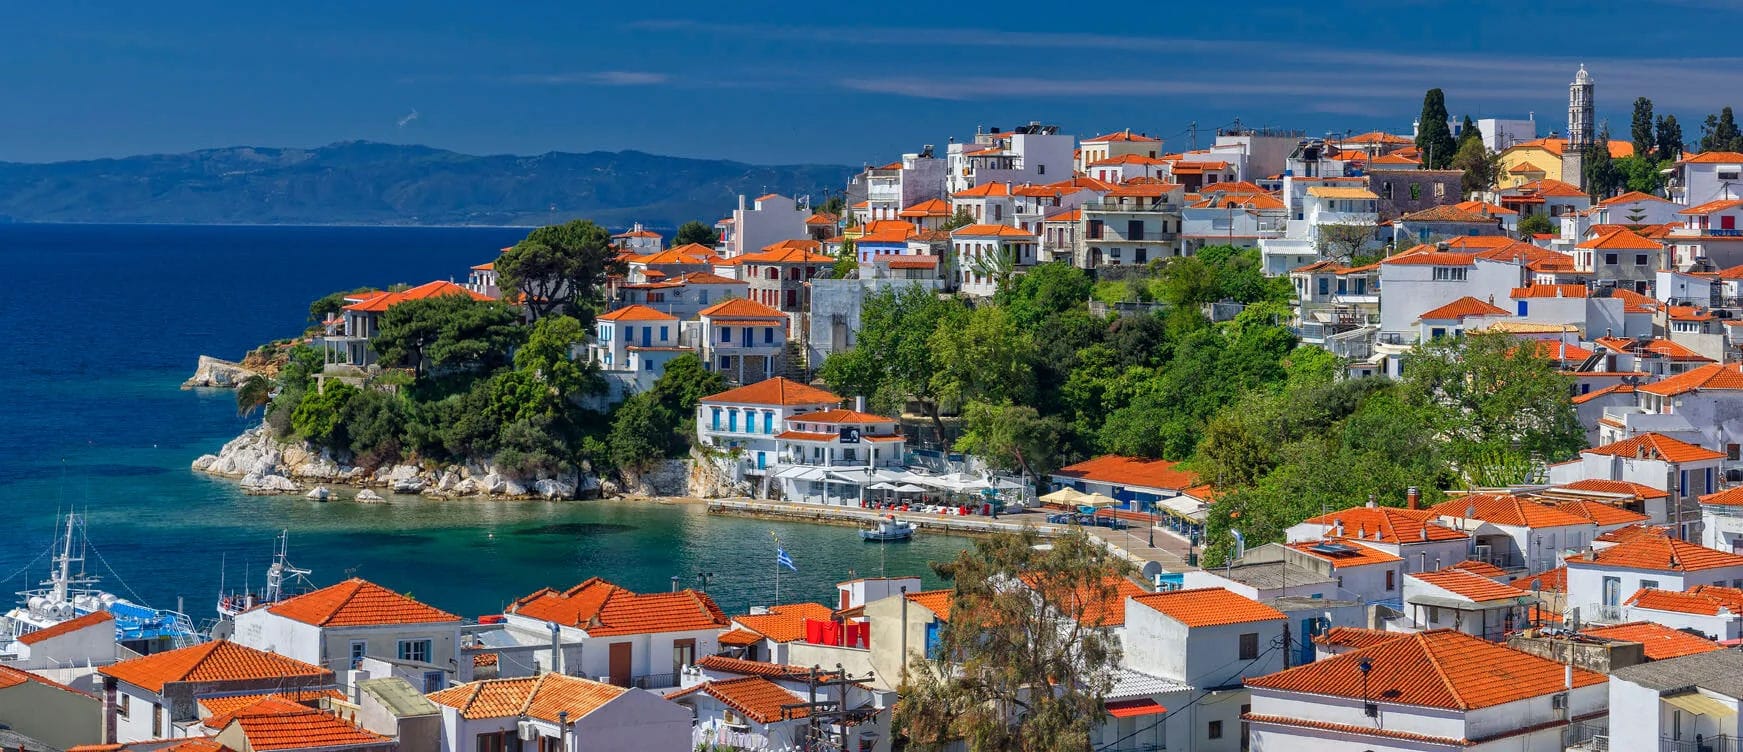 Scenic view of a coastal town with white buildings and red-tiled roofs under a clear blue sky. The town is nestled along a shoreline with boats docked in a small harbor. Green trees and hills surround the area, and distant mountains are visible across the water.